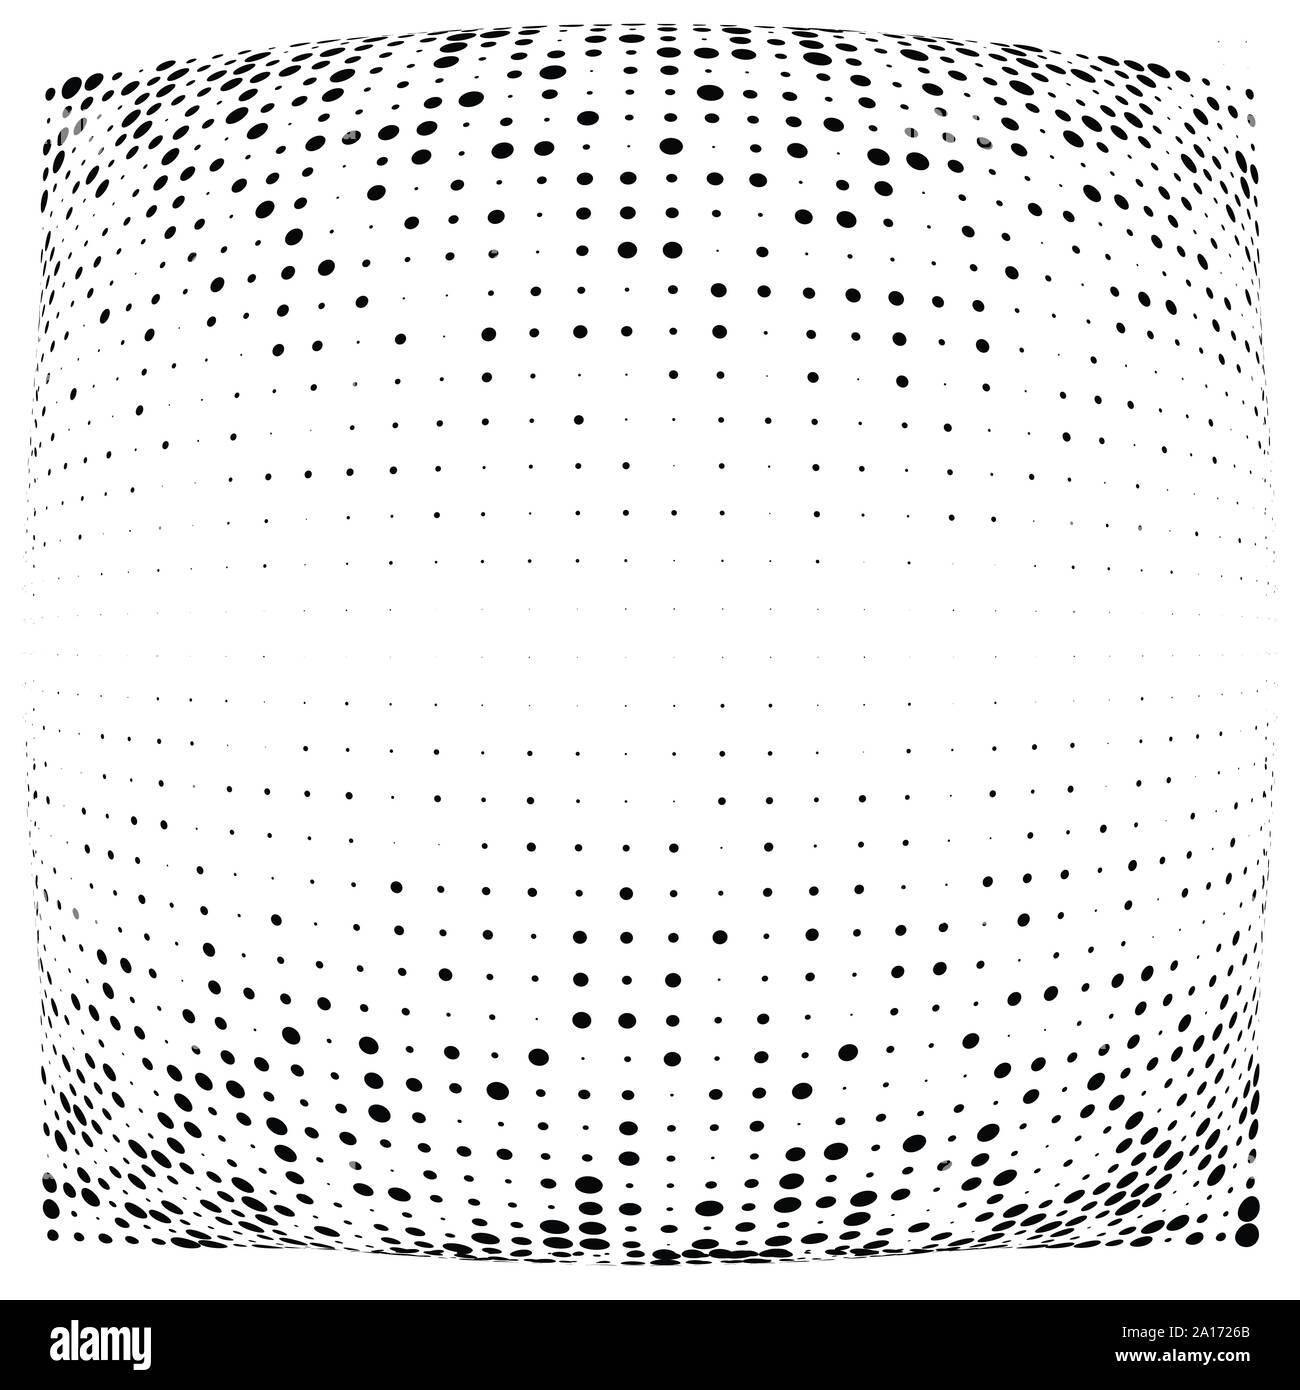 Half-tone dots. Dotted, circles pattern. Sphere, orb or globe distortion speckles. Diffuse radial, radiating bulge, bloat warp. Polka-dot inflate desi Stock Vector